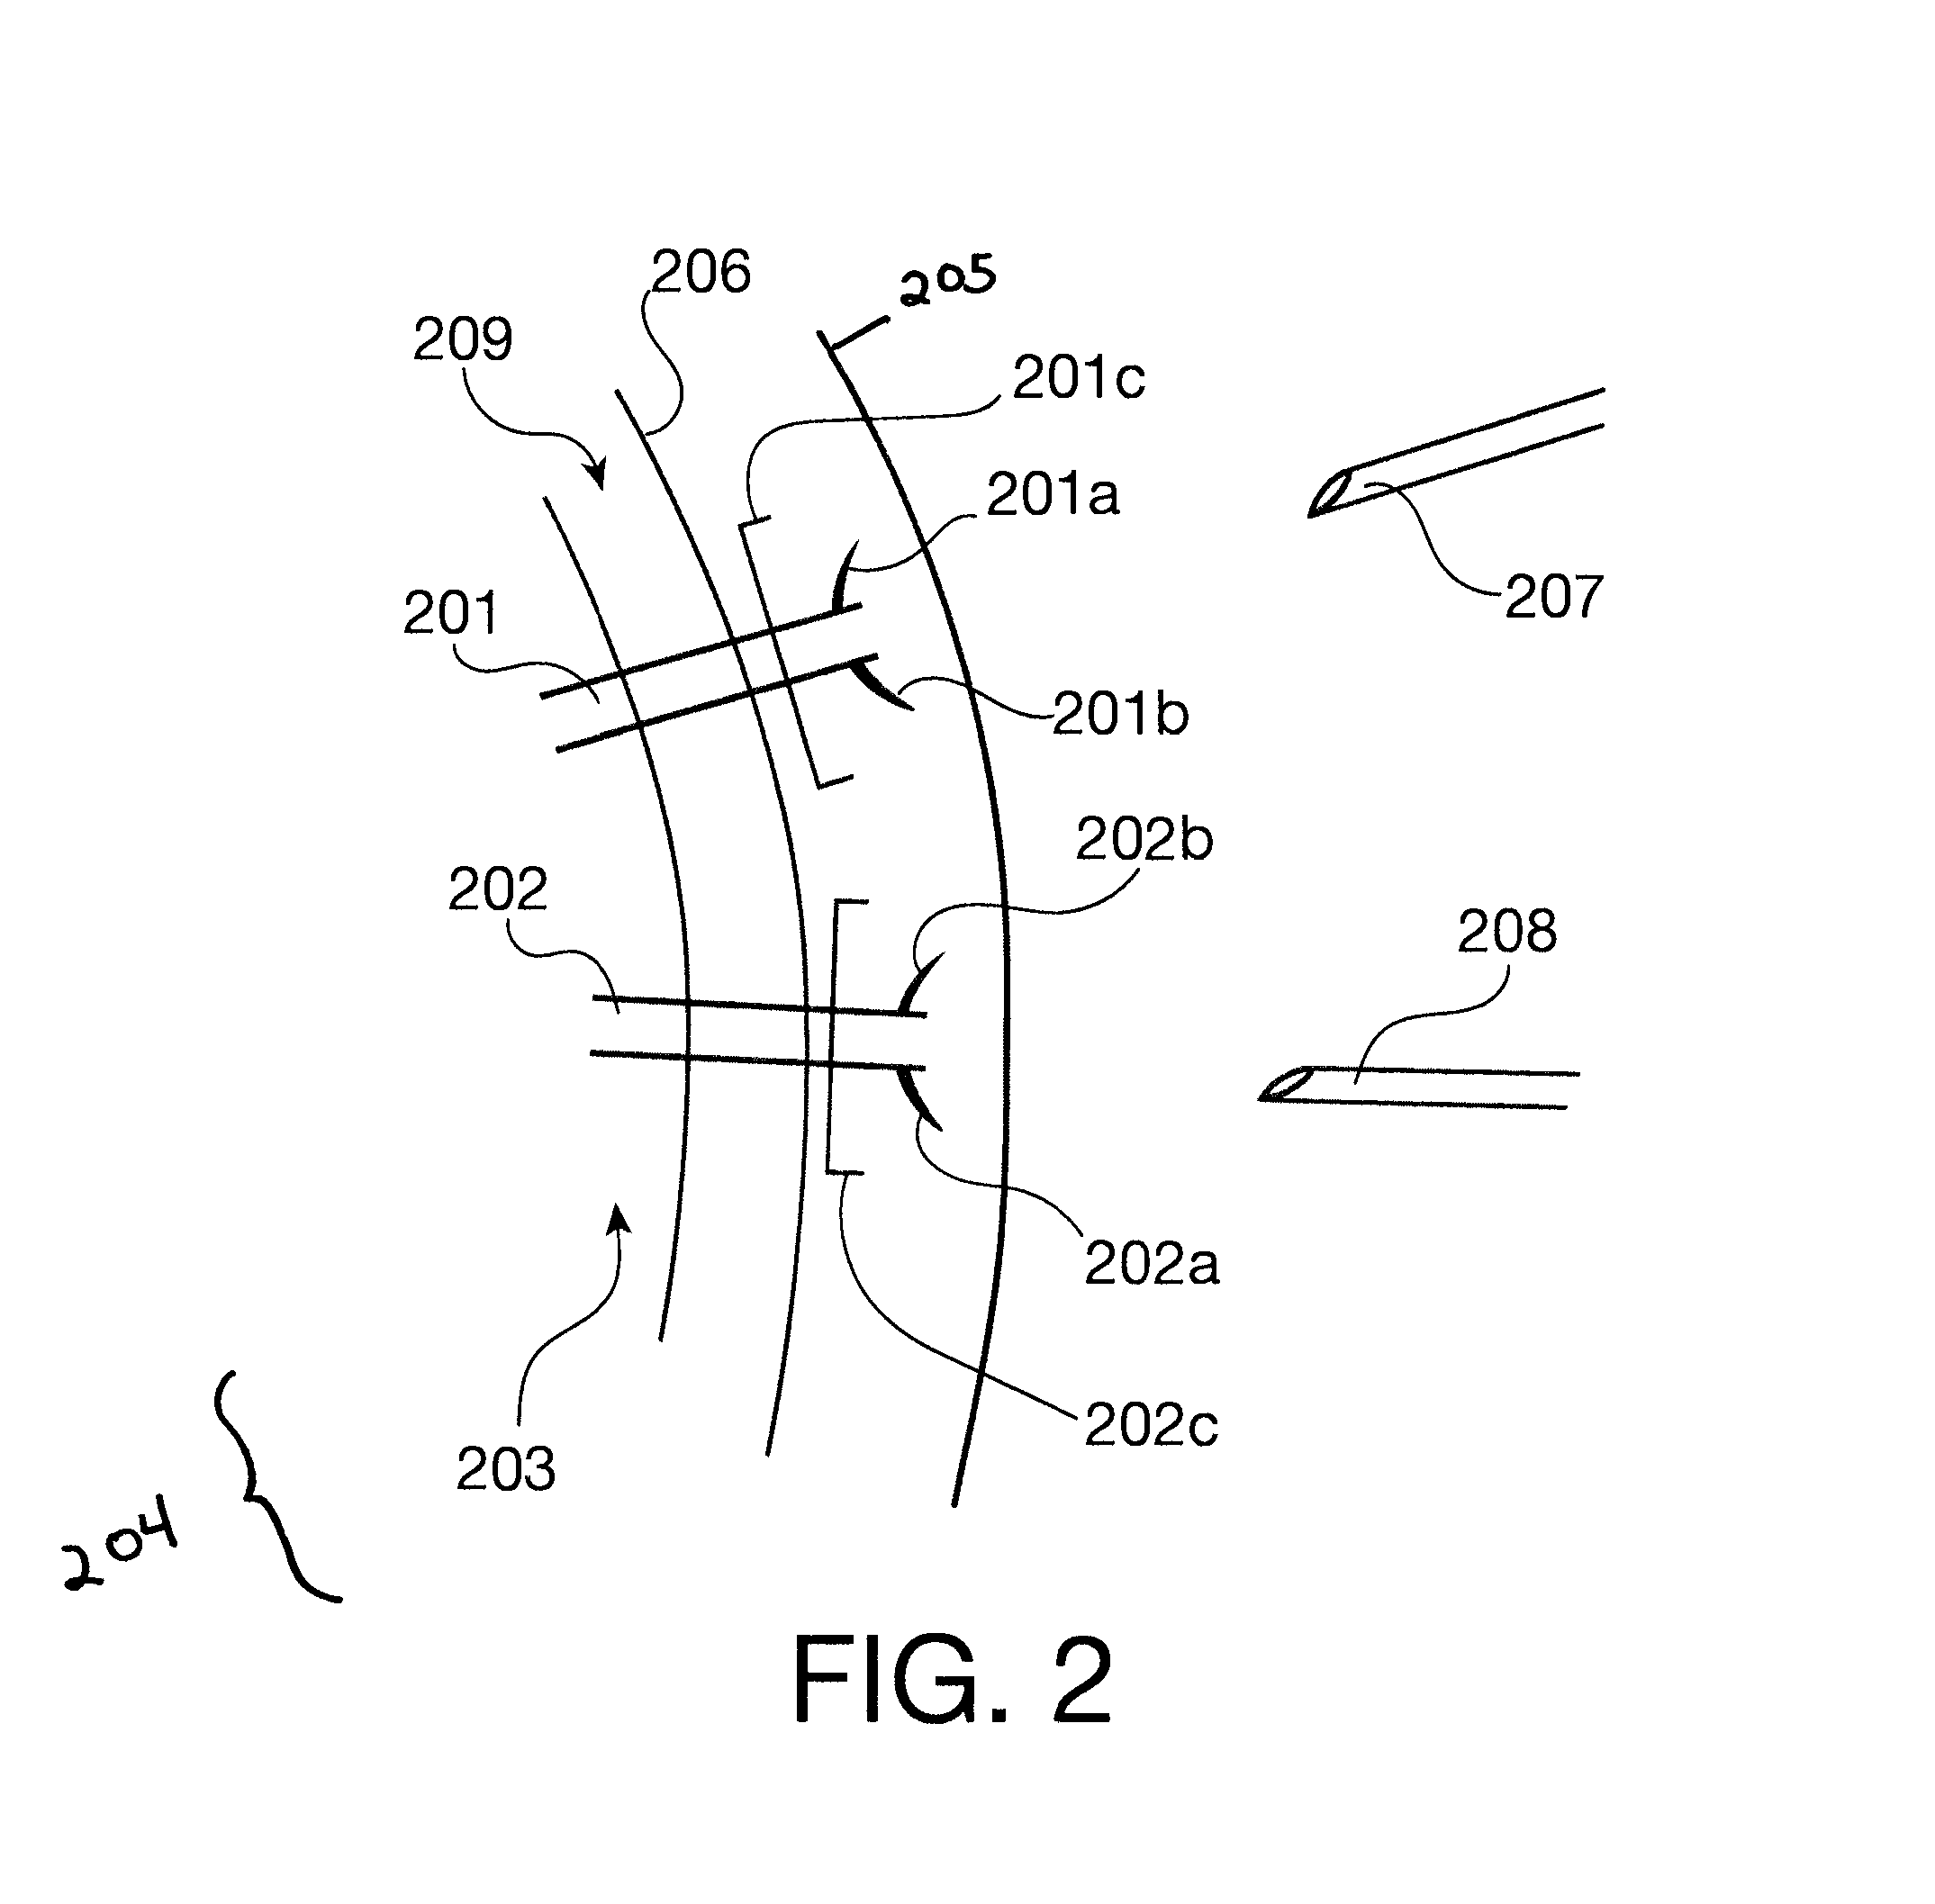 System and Method for Administering Peritoneal Dialysis